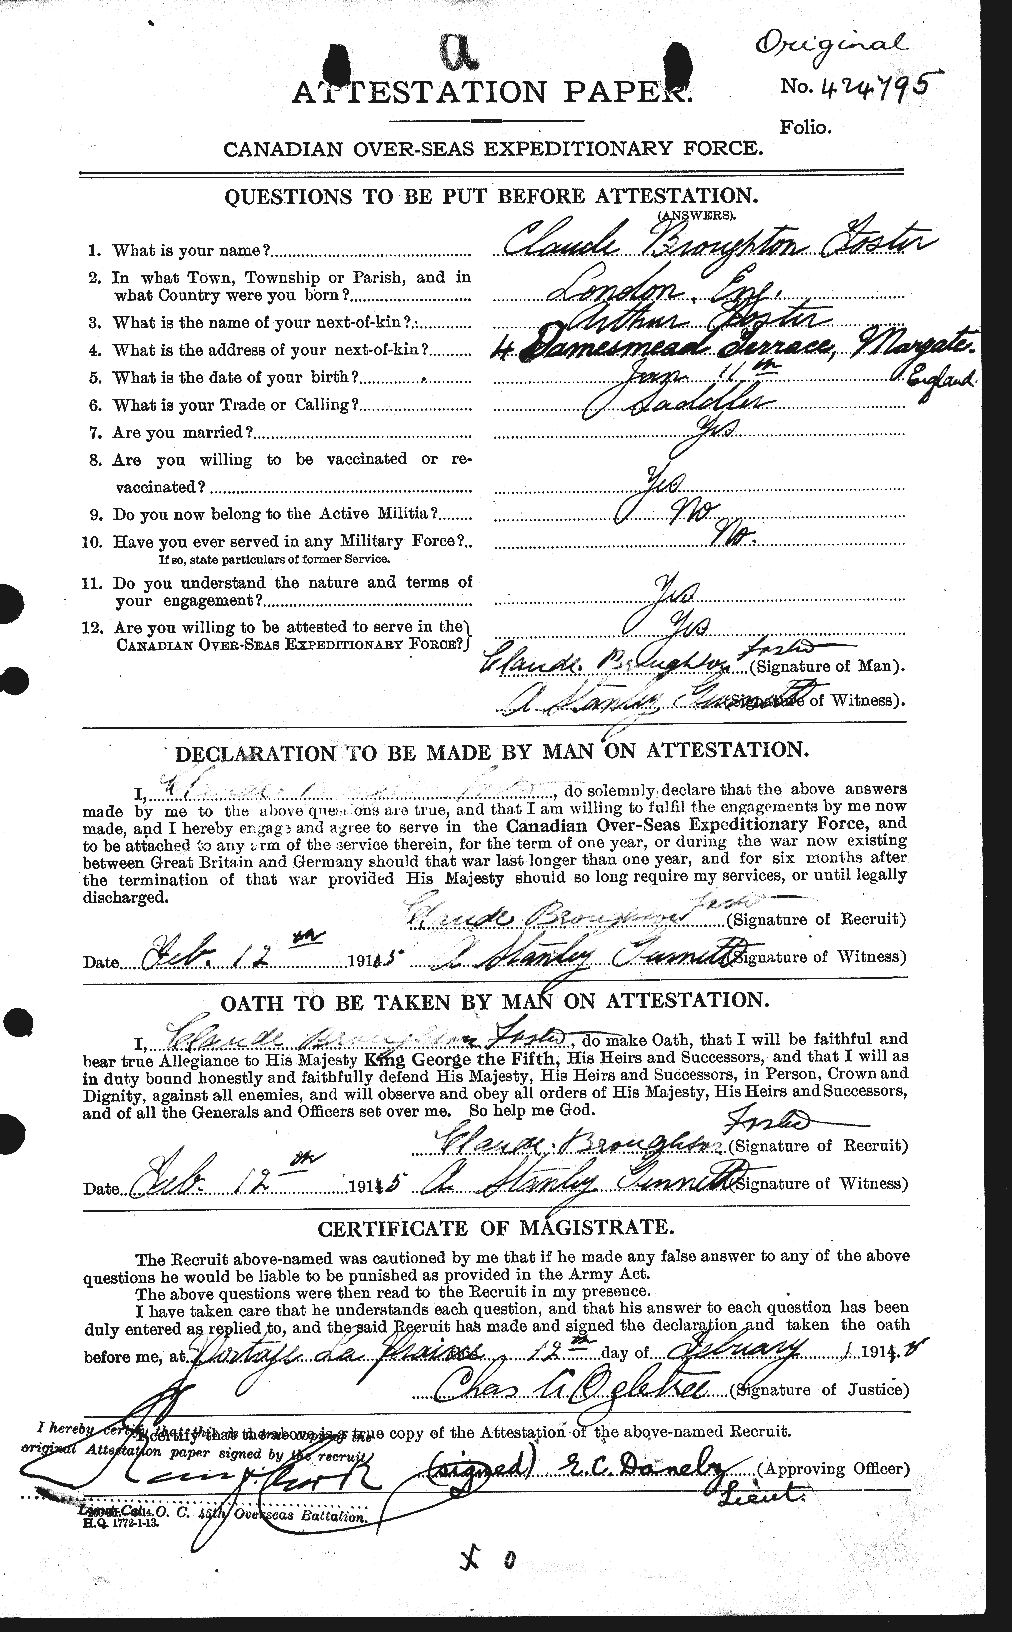 Personnel Records of the First World War - CEF 337282a